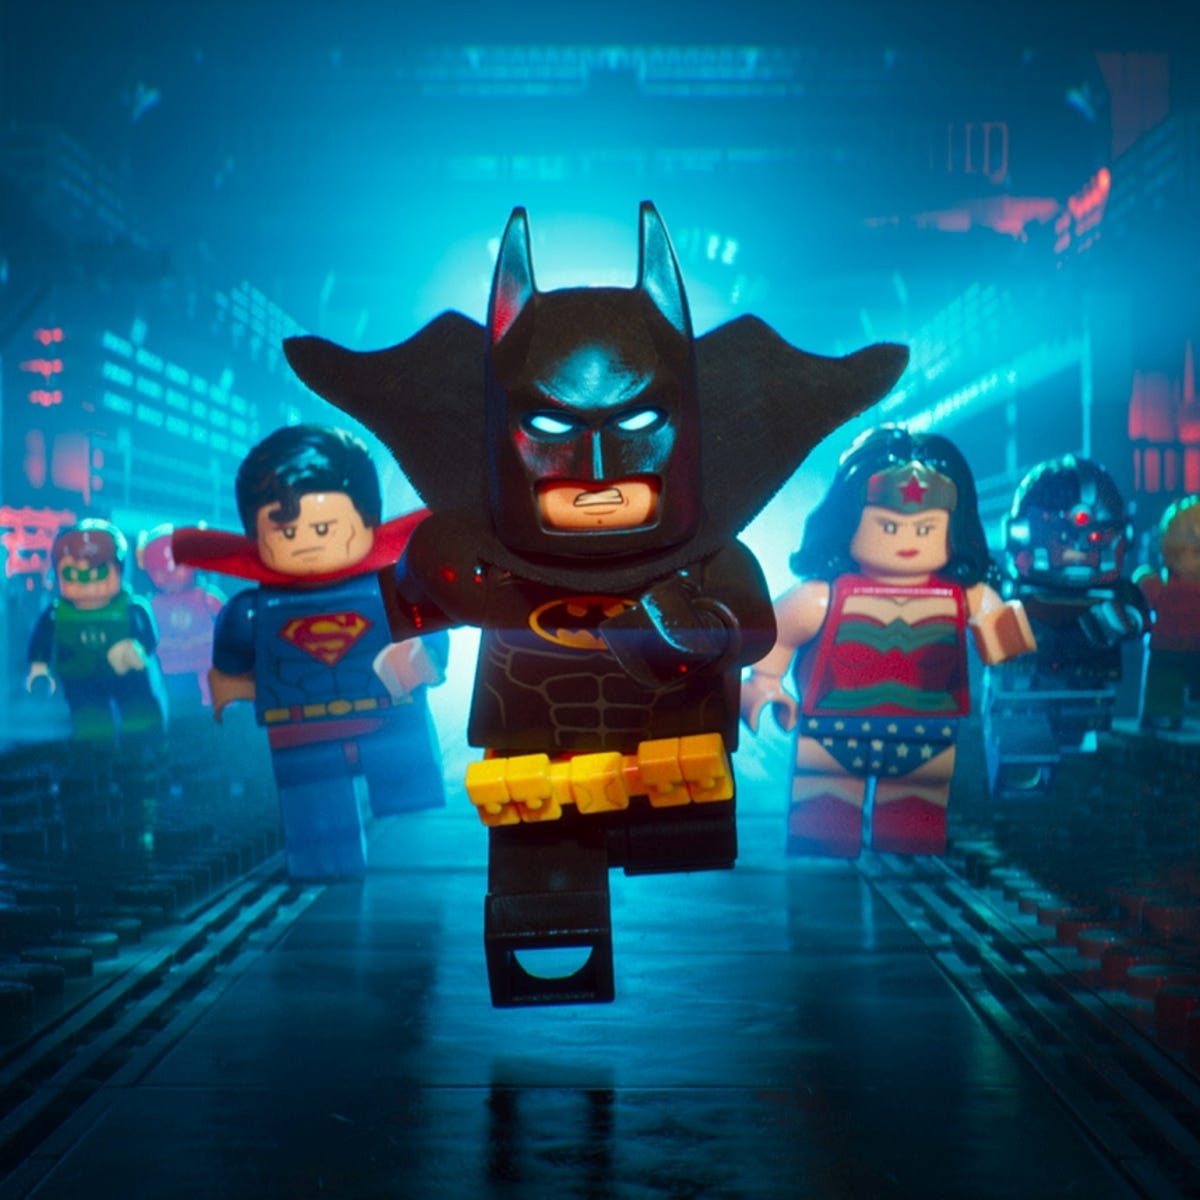 The LEGO Batman Movie' Puts DC's Extended Universe To Shame